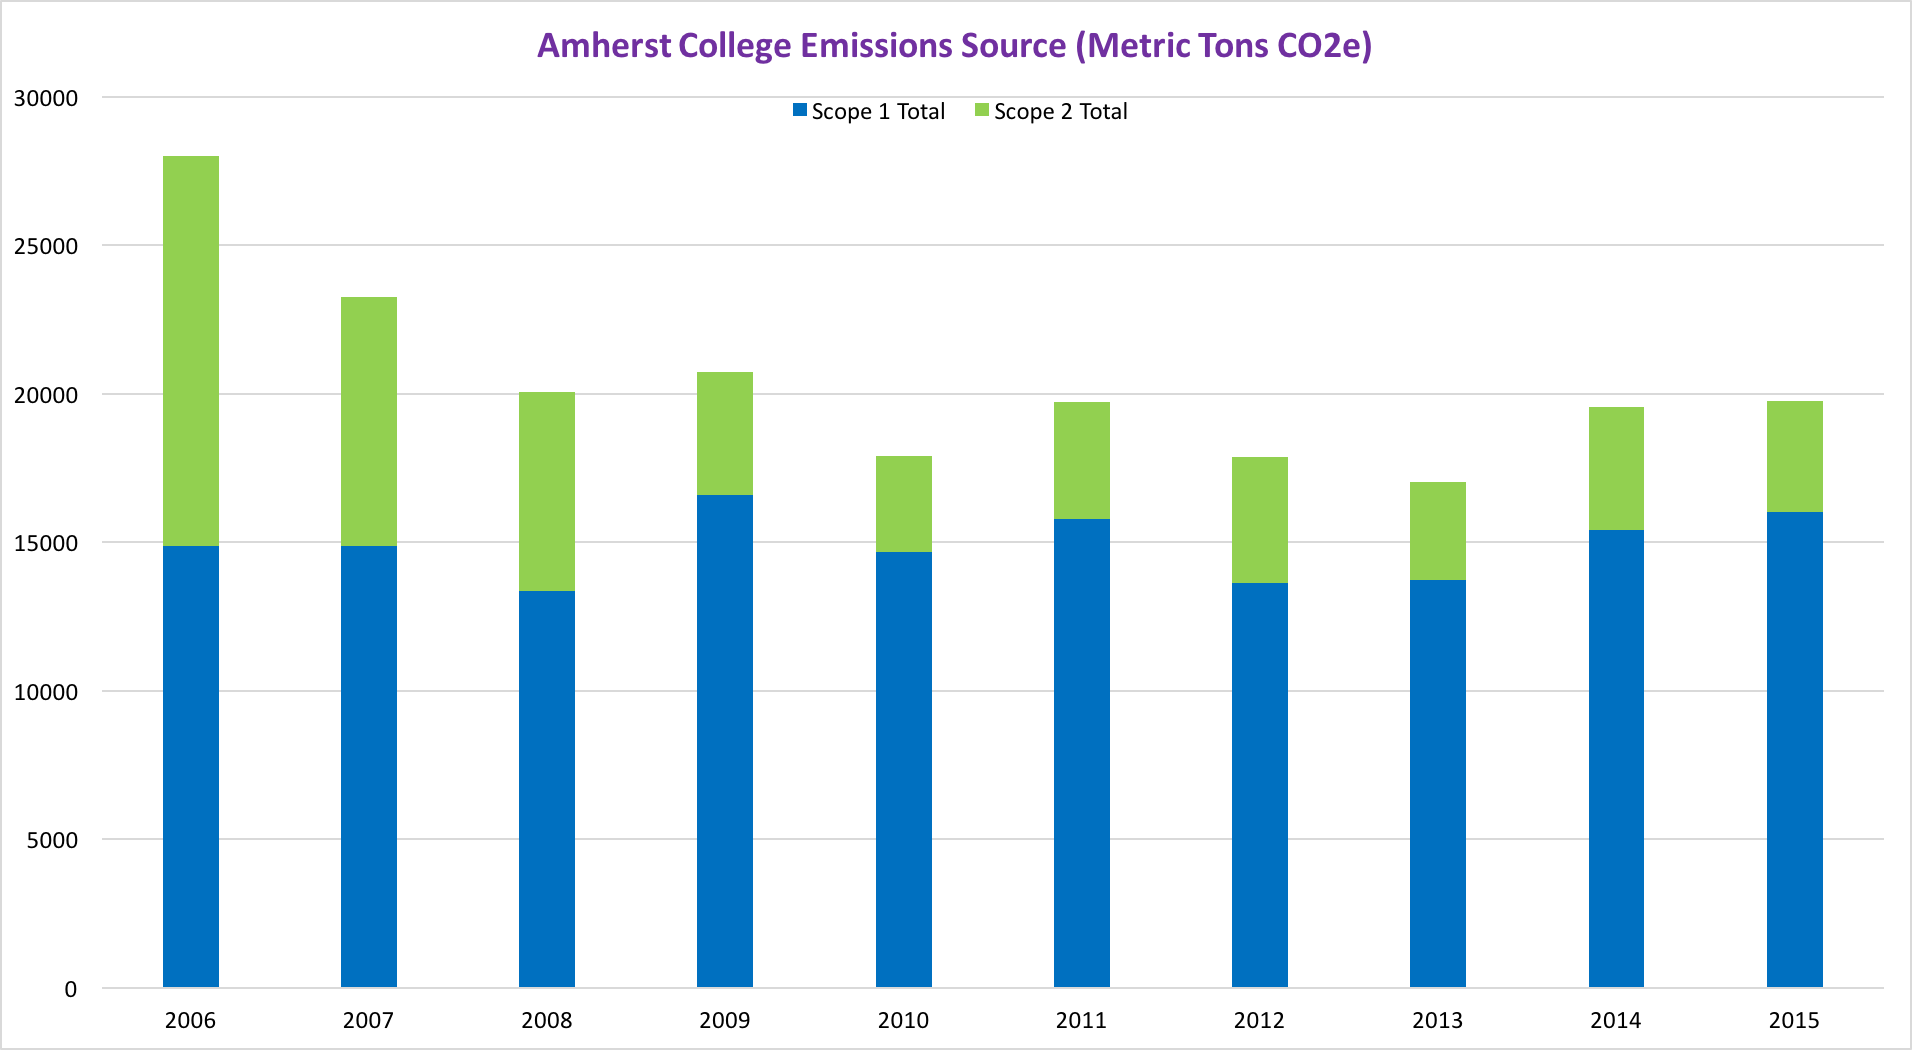 Amherst College Emissions by Scope